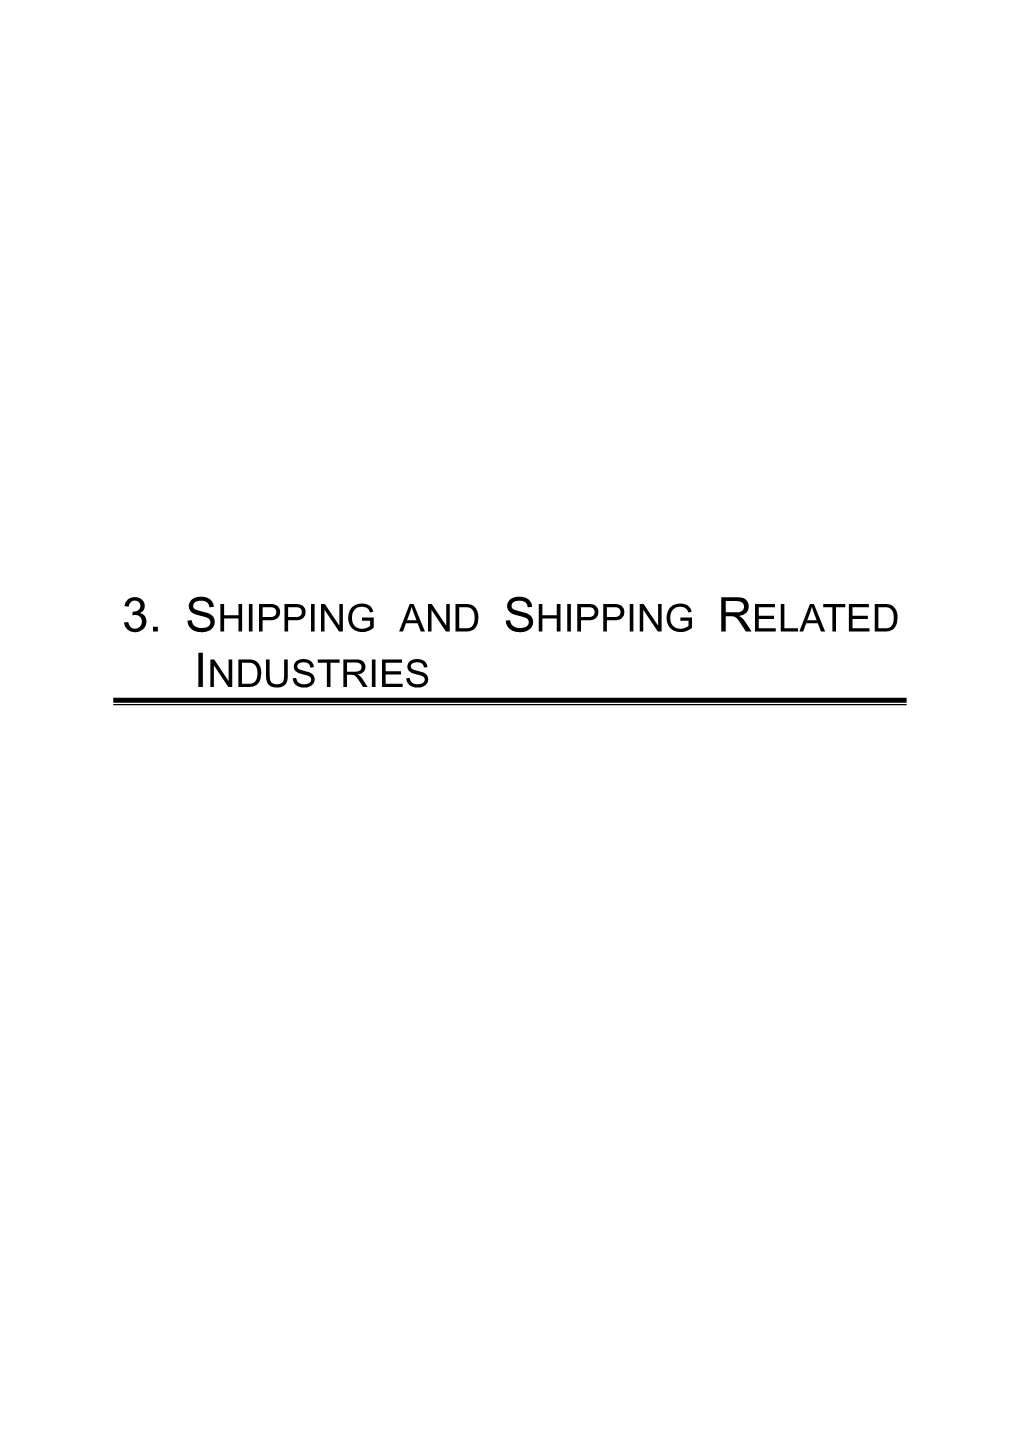 3. Shipping and Shipping Related Industries